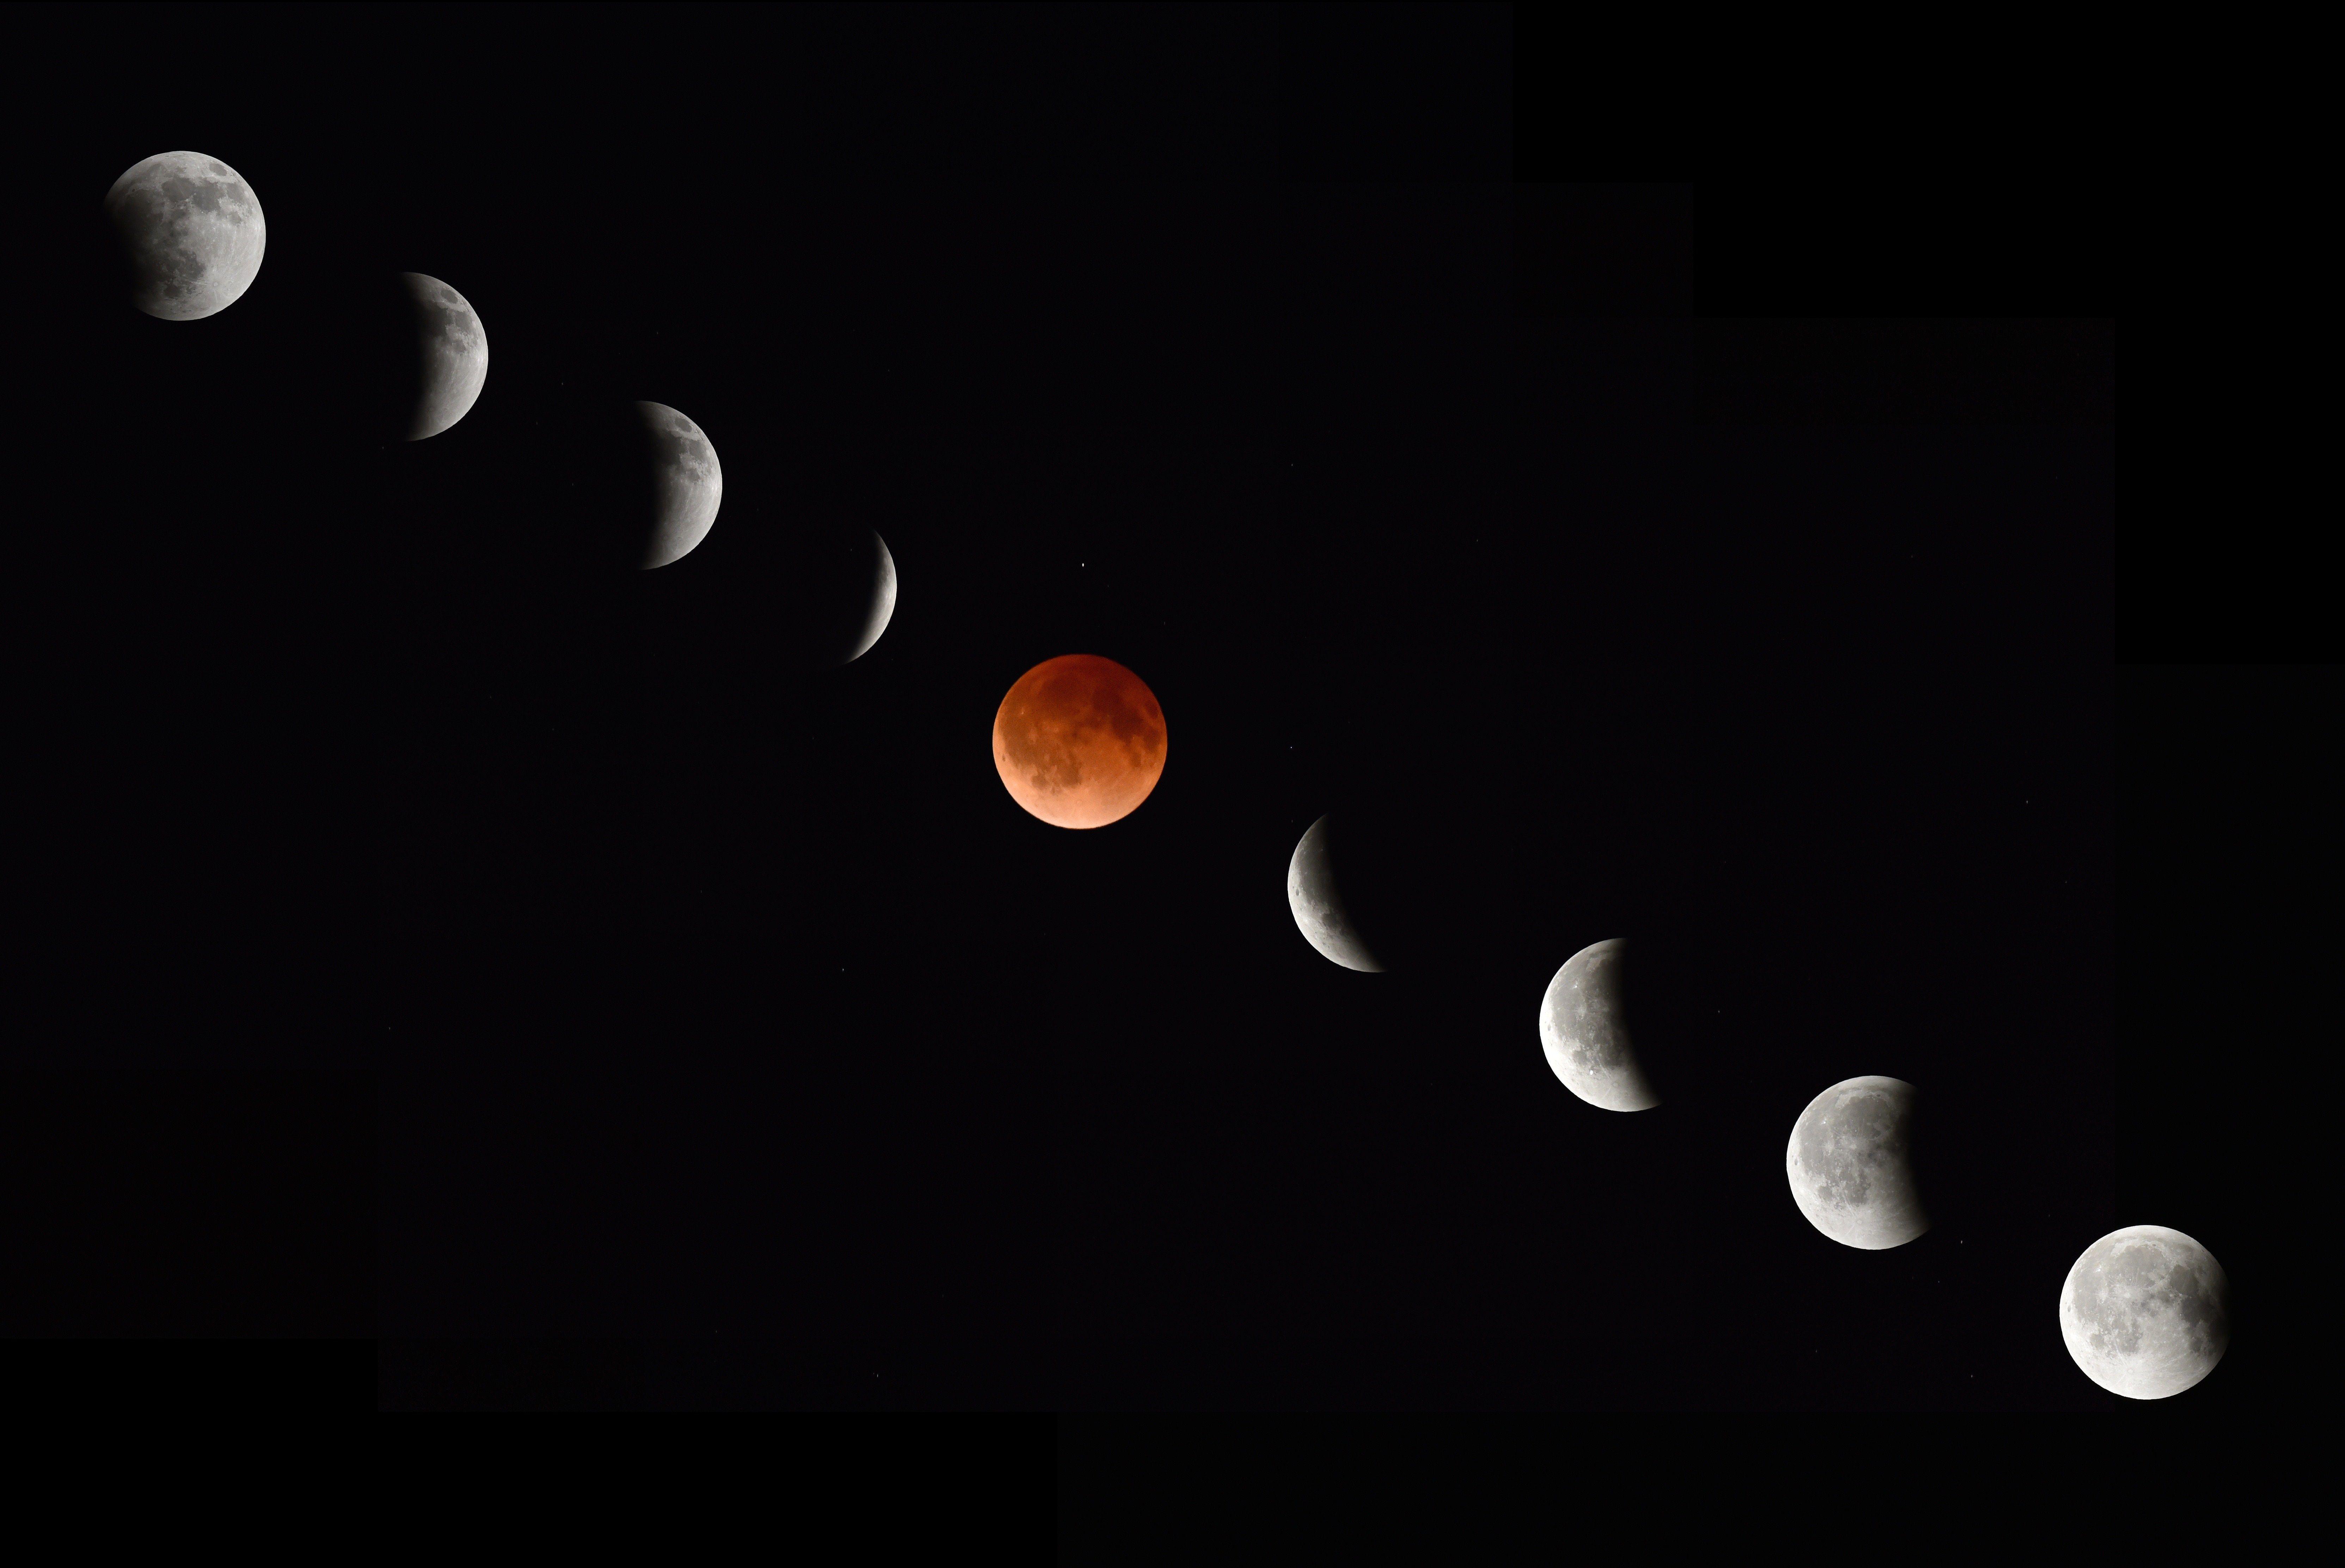 How to see Saturday's lunar eclipse and blood moon